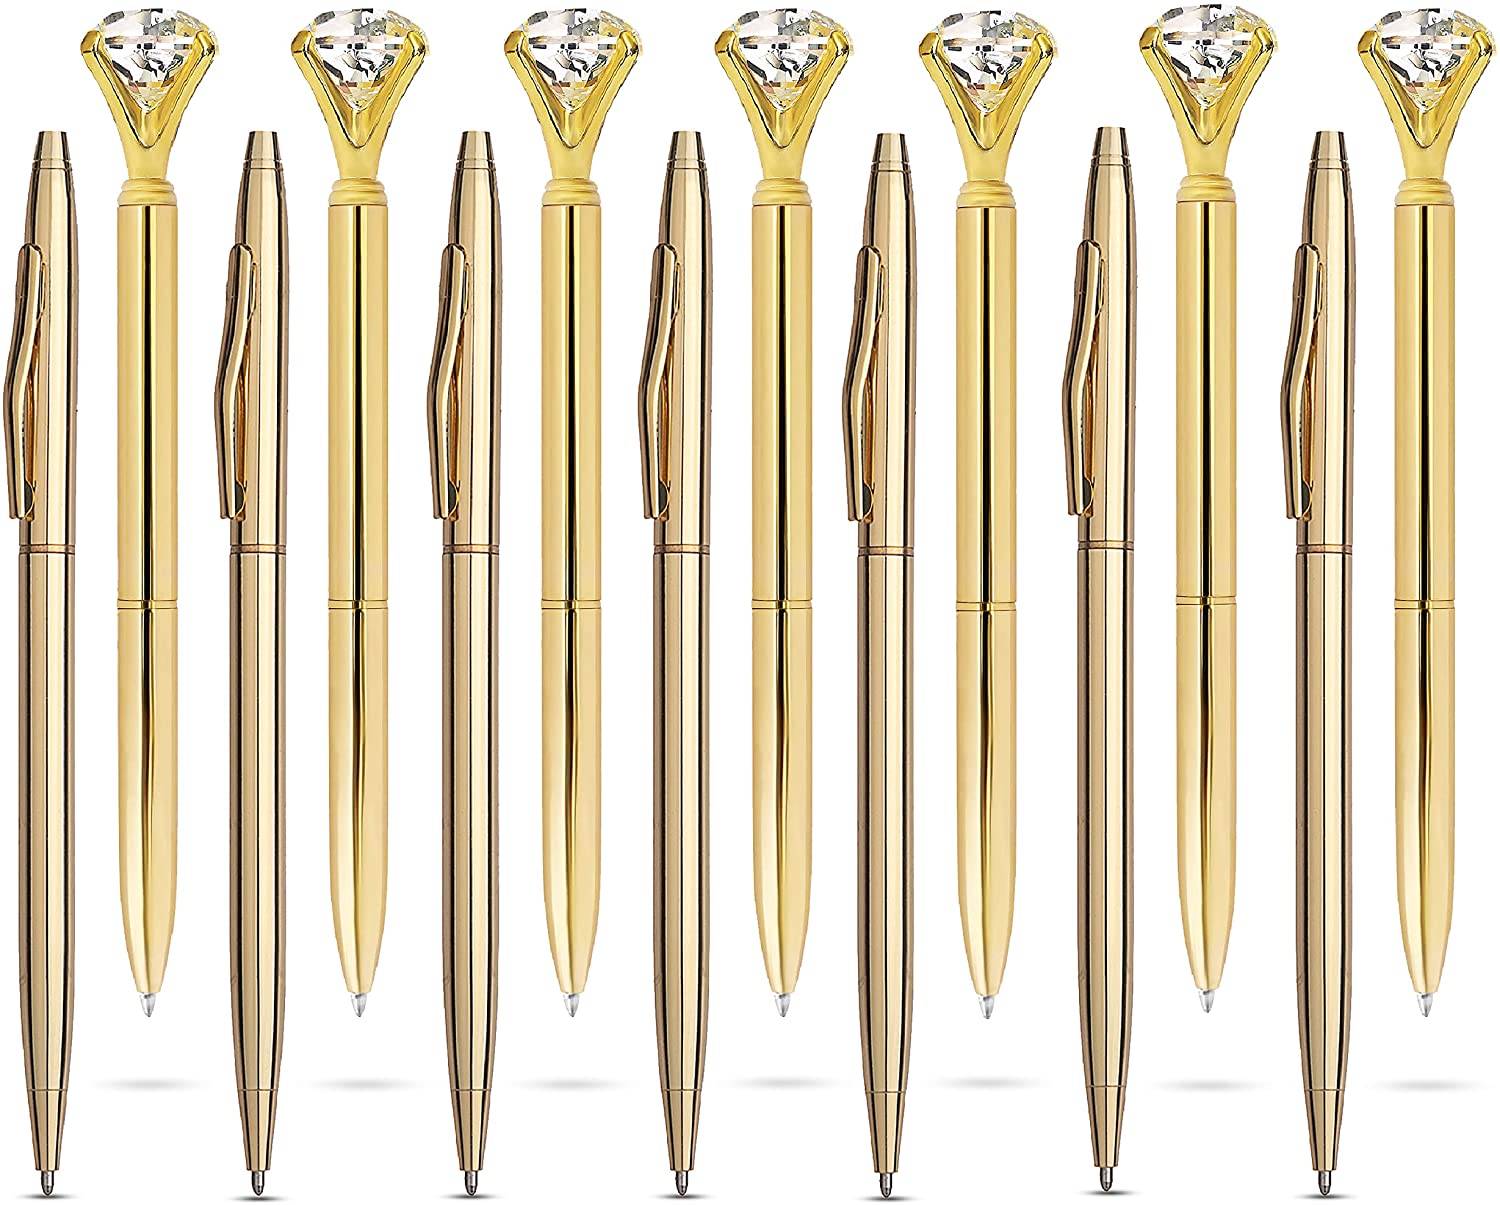 7 Diamond Ballpoint Pens and 7 Slim Gold Pens - Stylish Fancy Office Supplies - 14 Pack